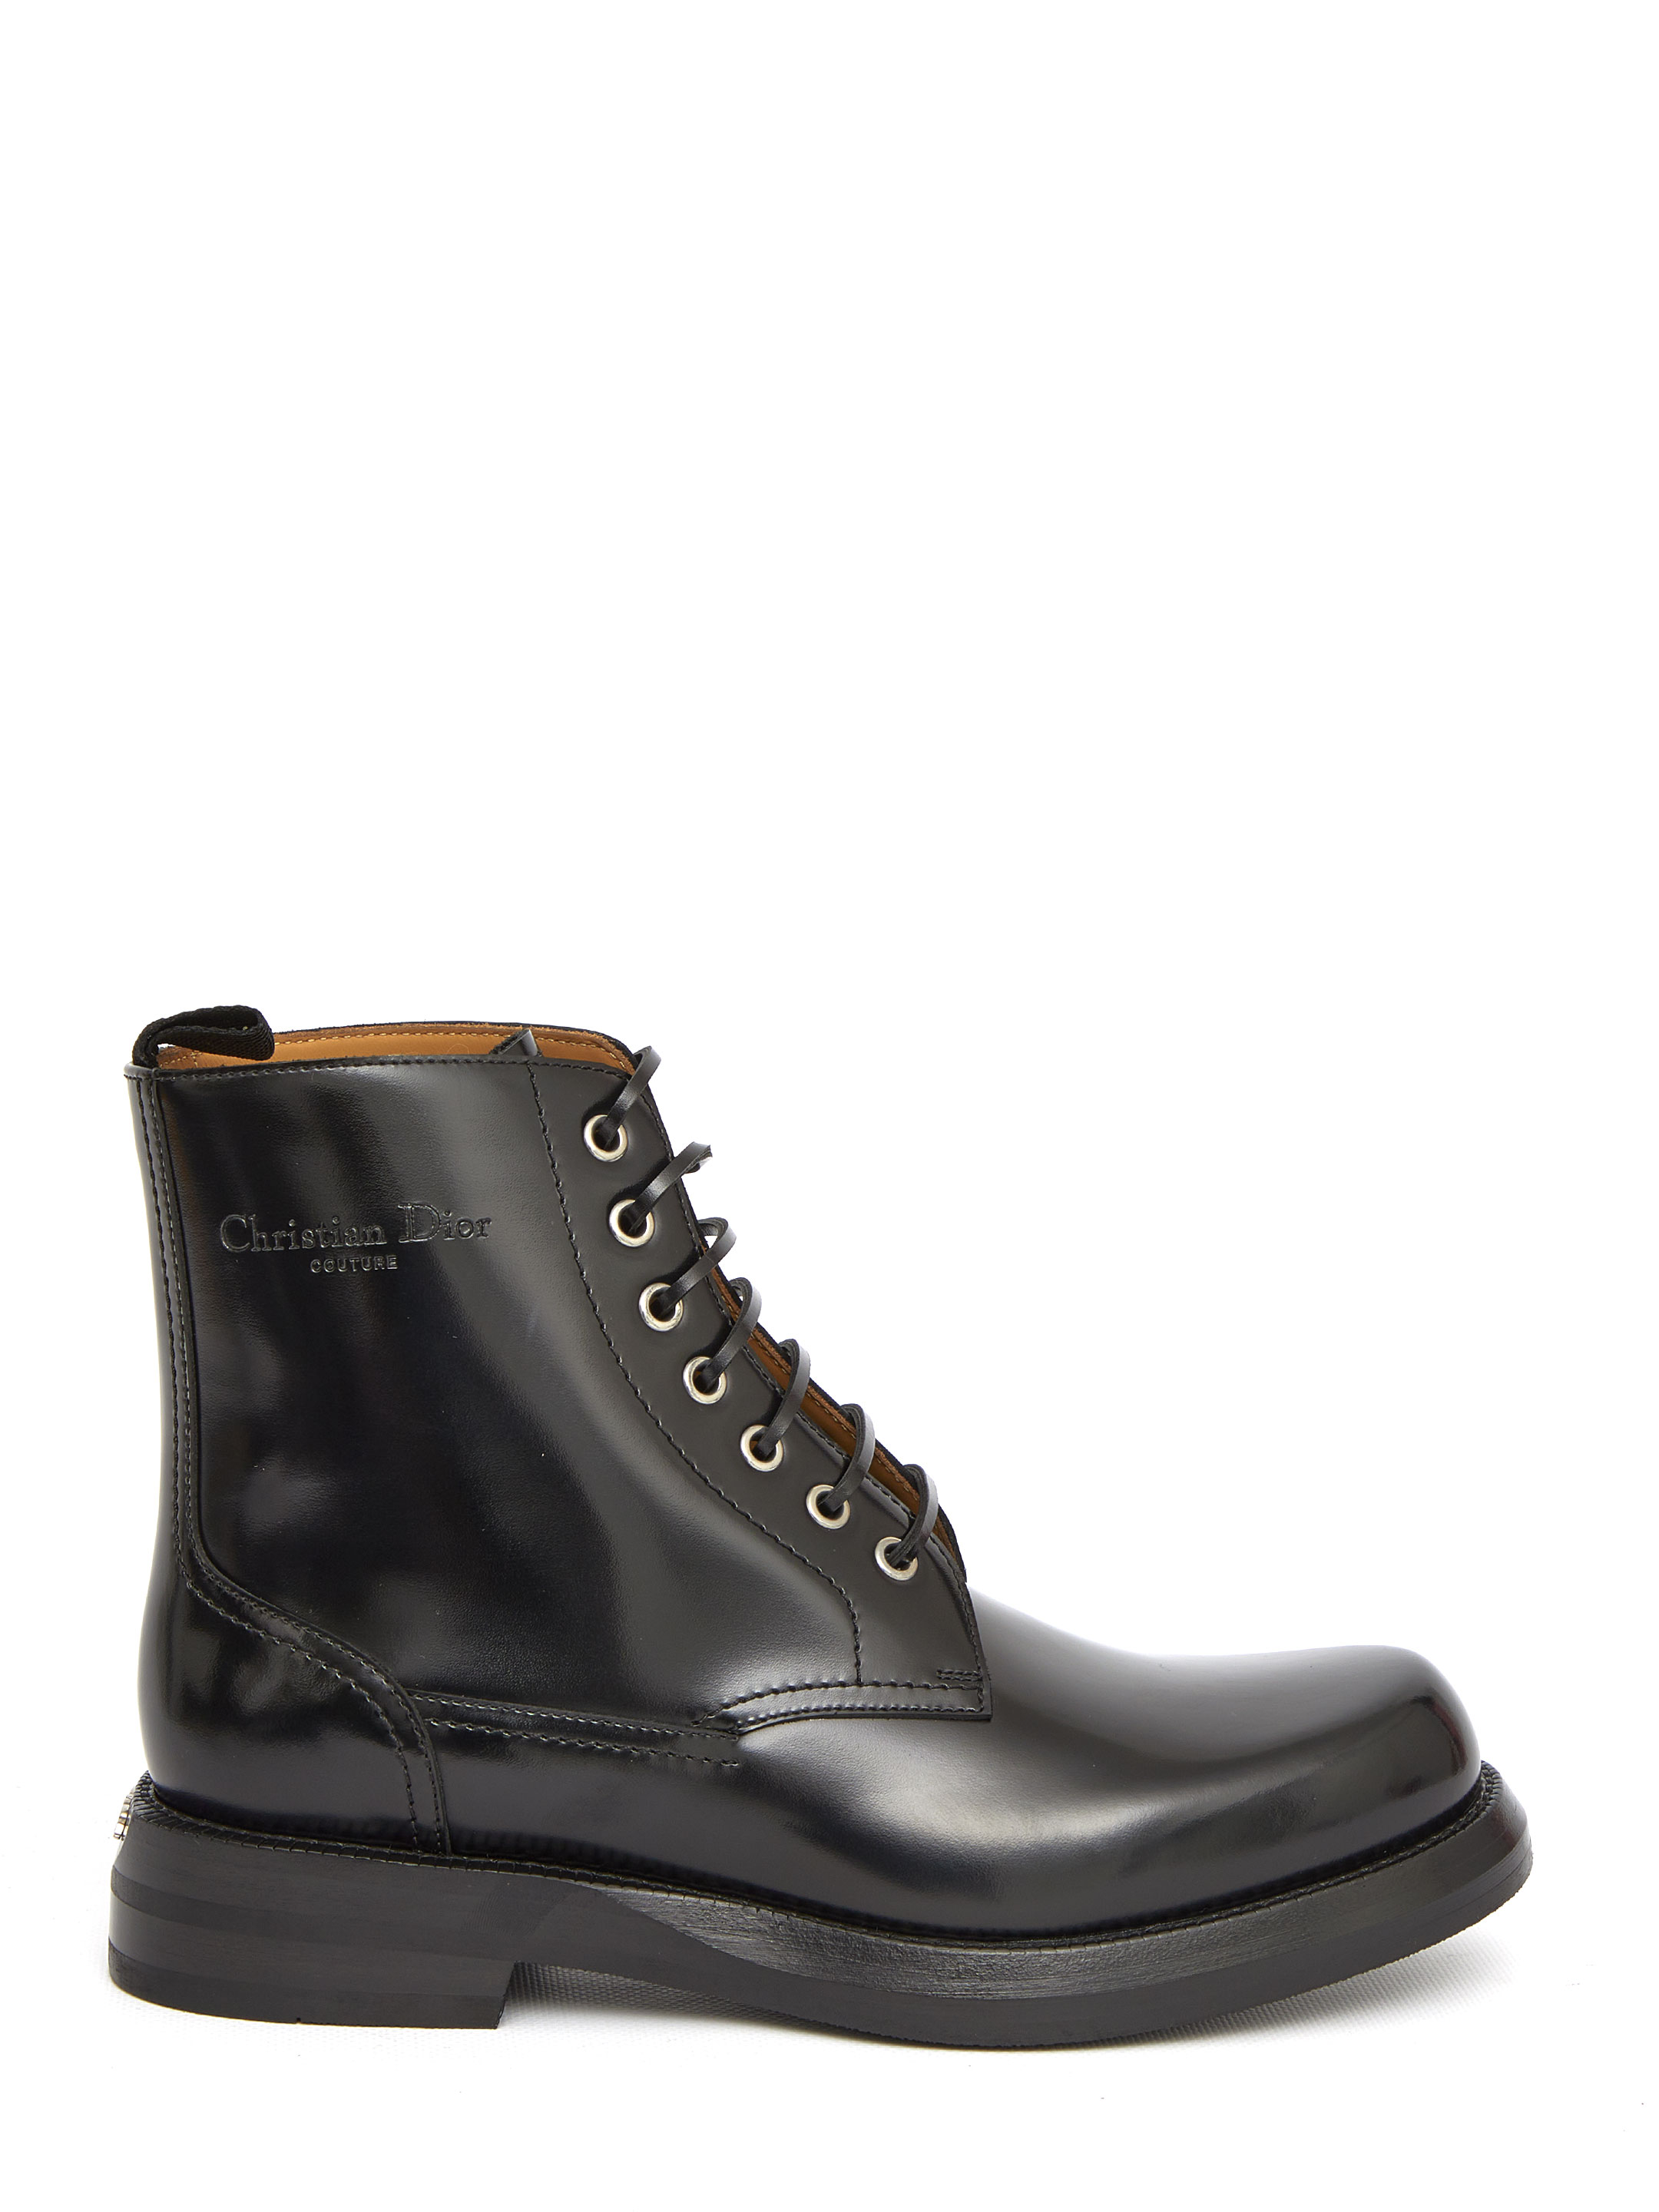 DIOR LEATHER CARLO BOOTS